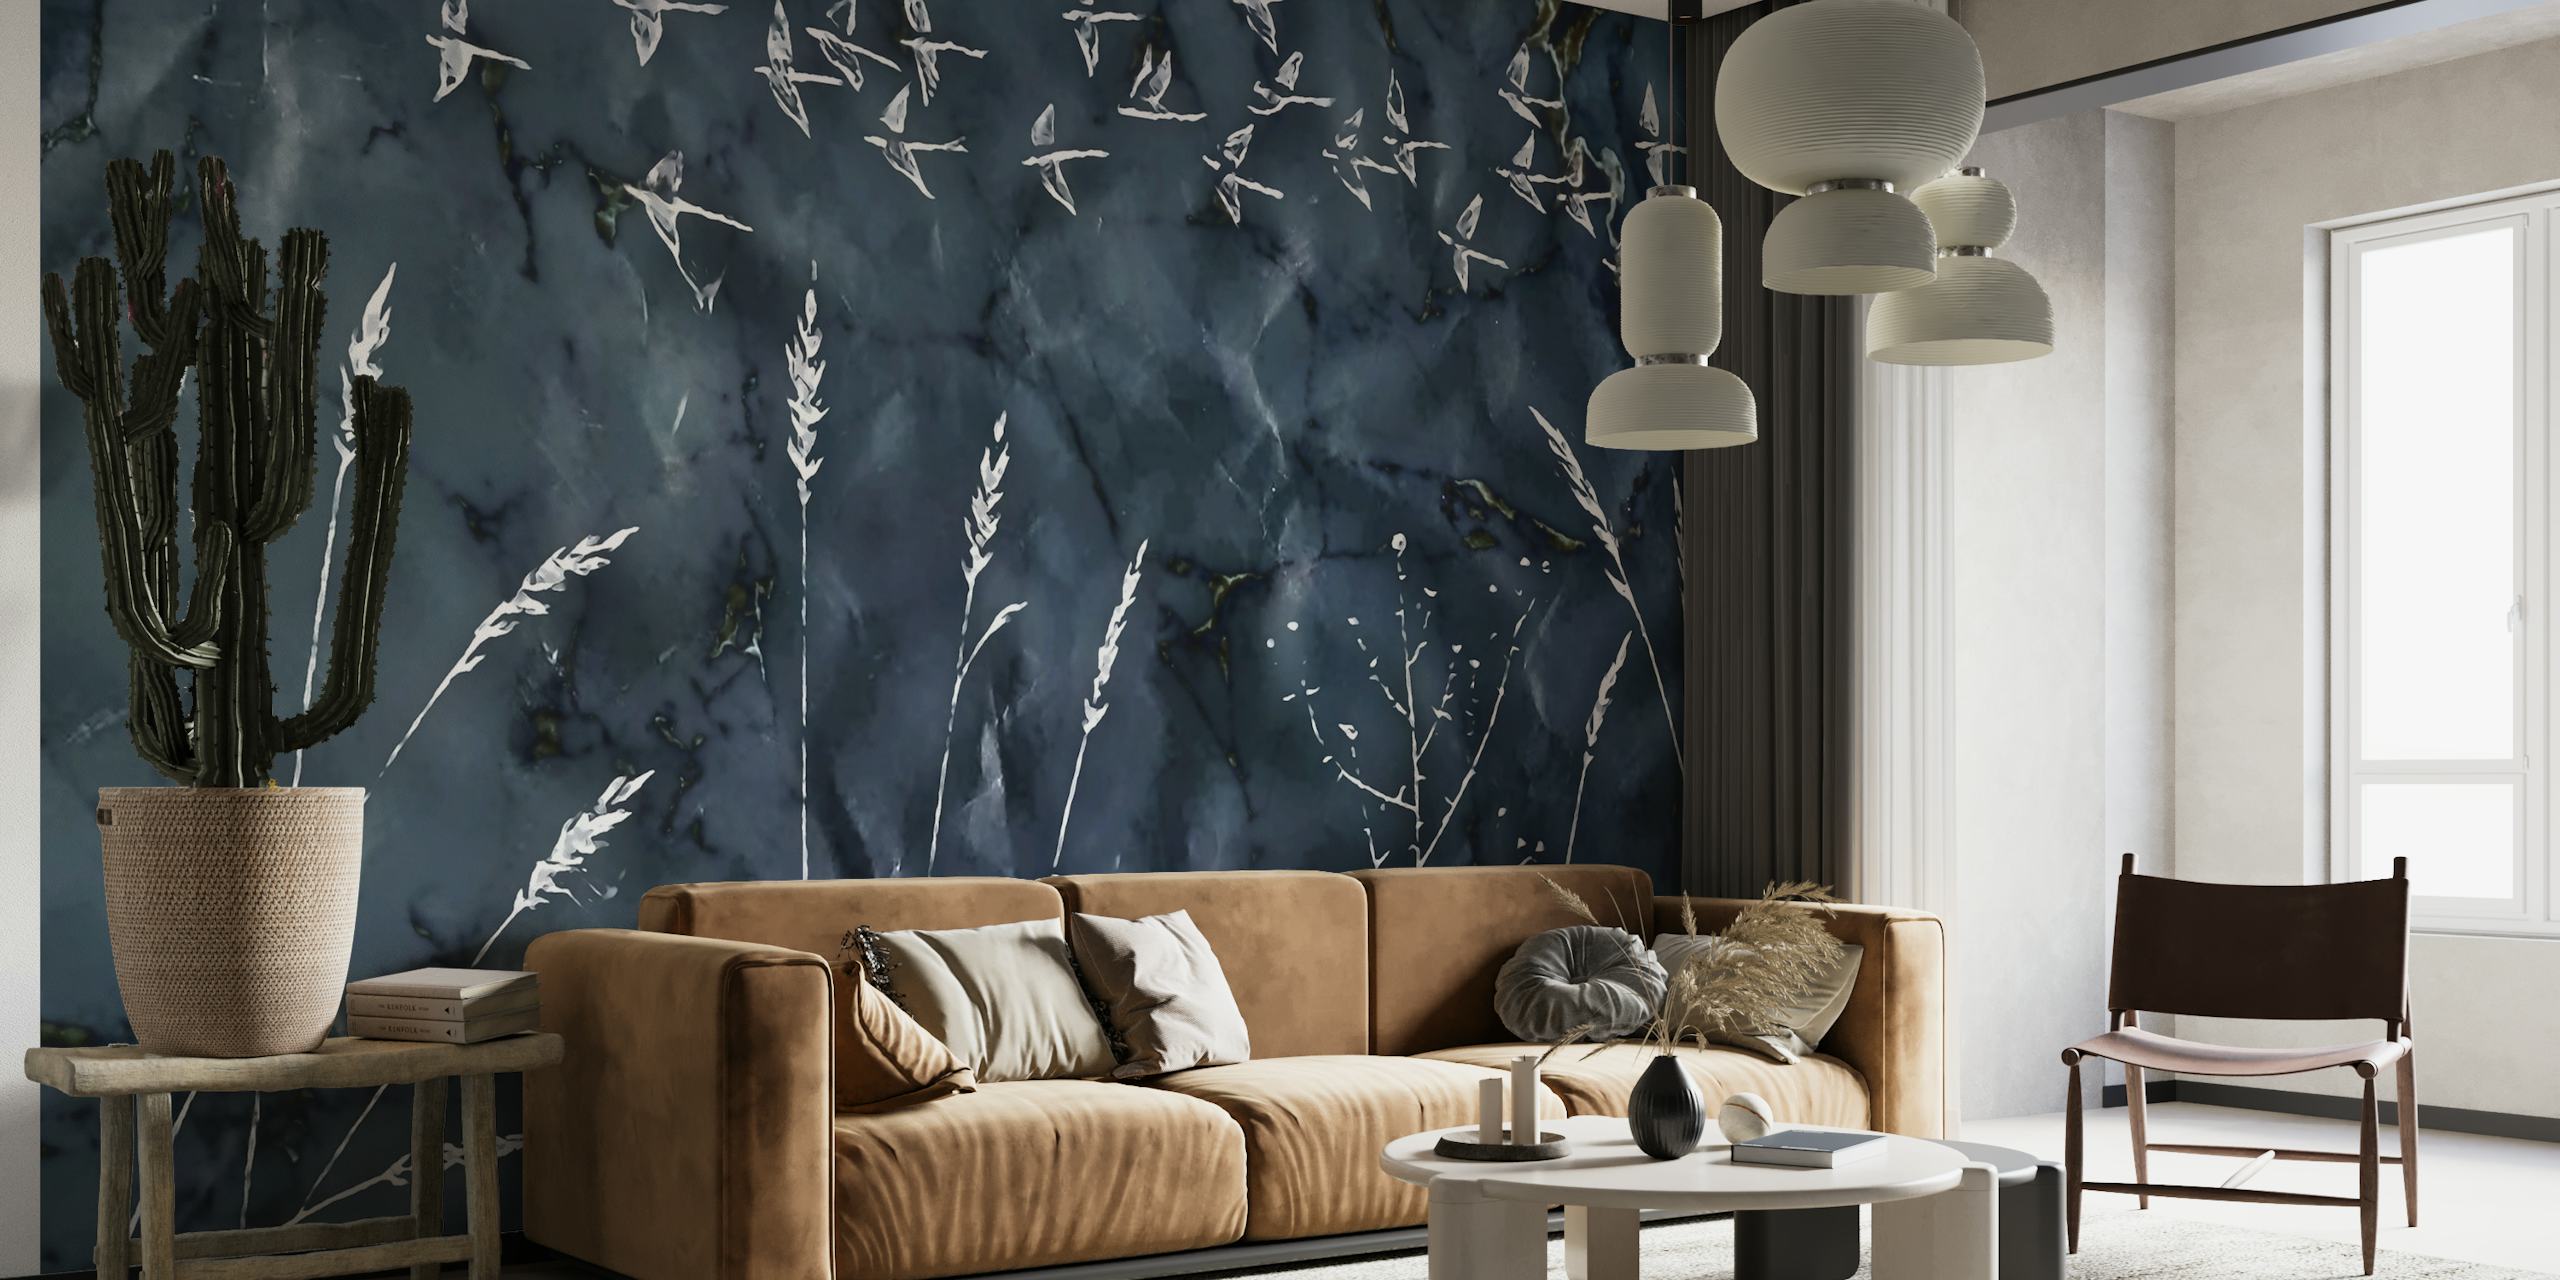 A wall mural featuring silhouettes of birds in flight over a marbled dark background with plant outlines.